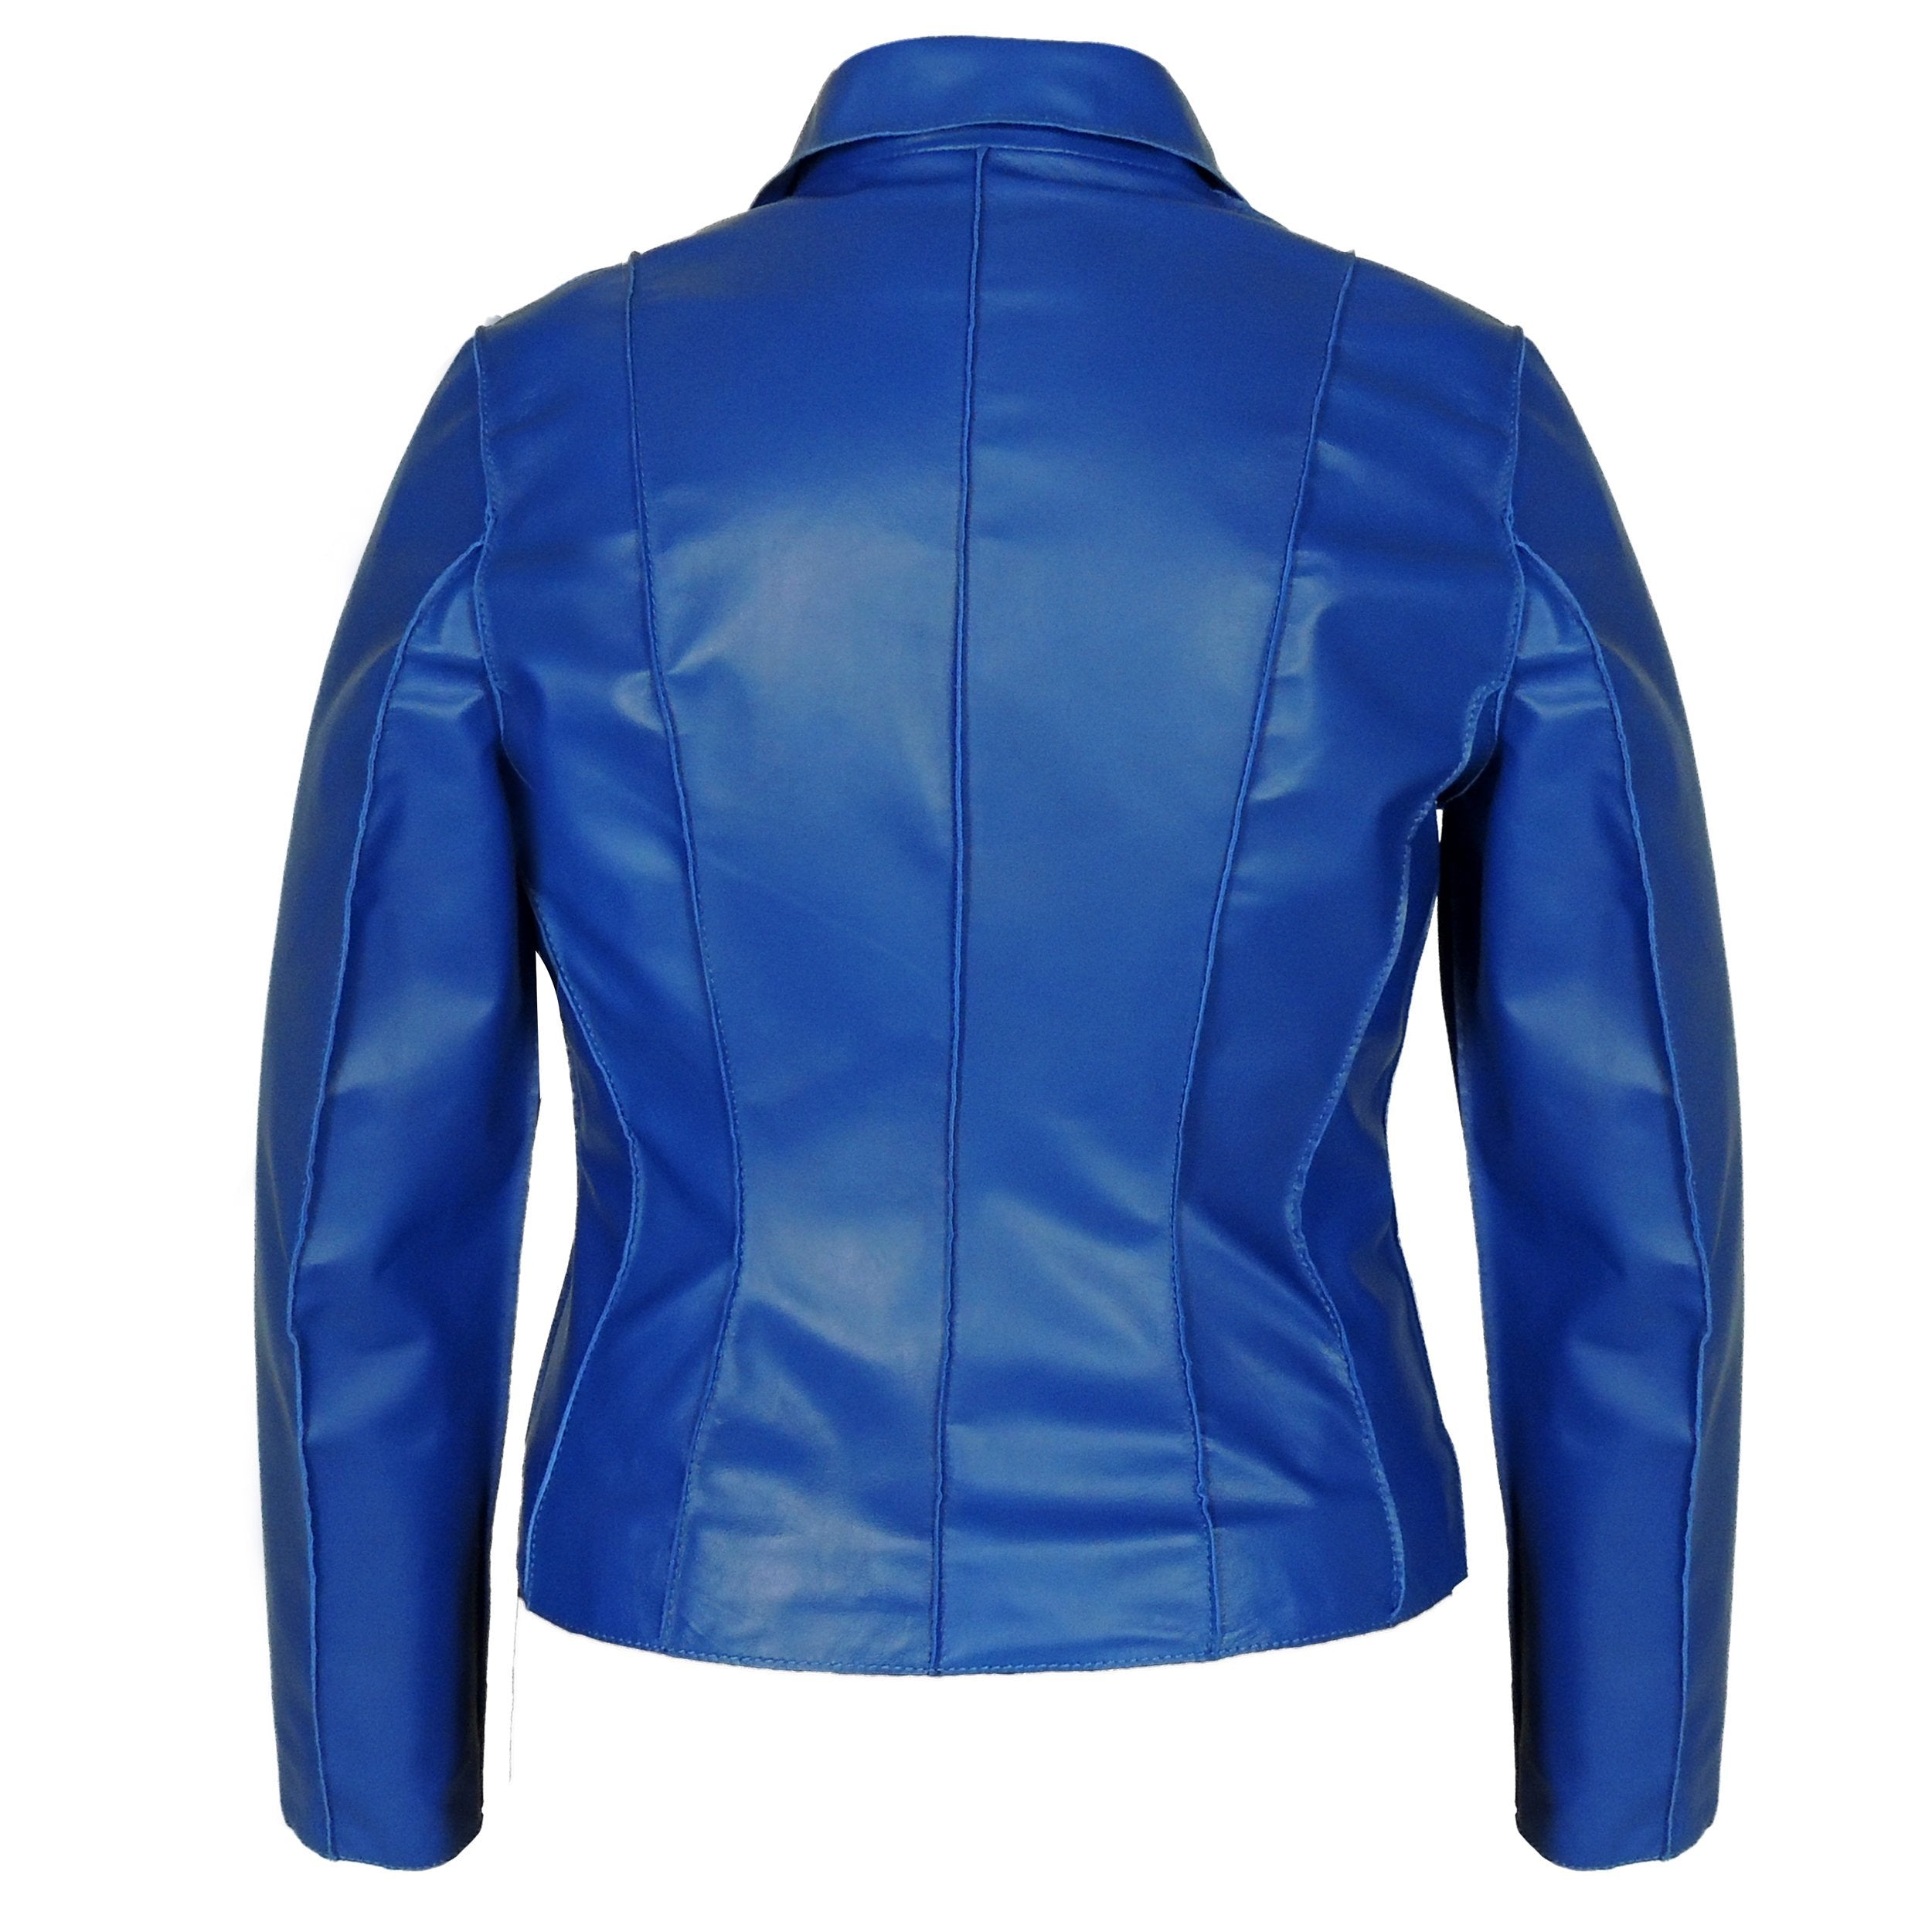 Picture of a Women's Professional Stunner Sheepskin Leather Jacket blue back view